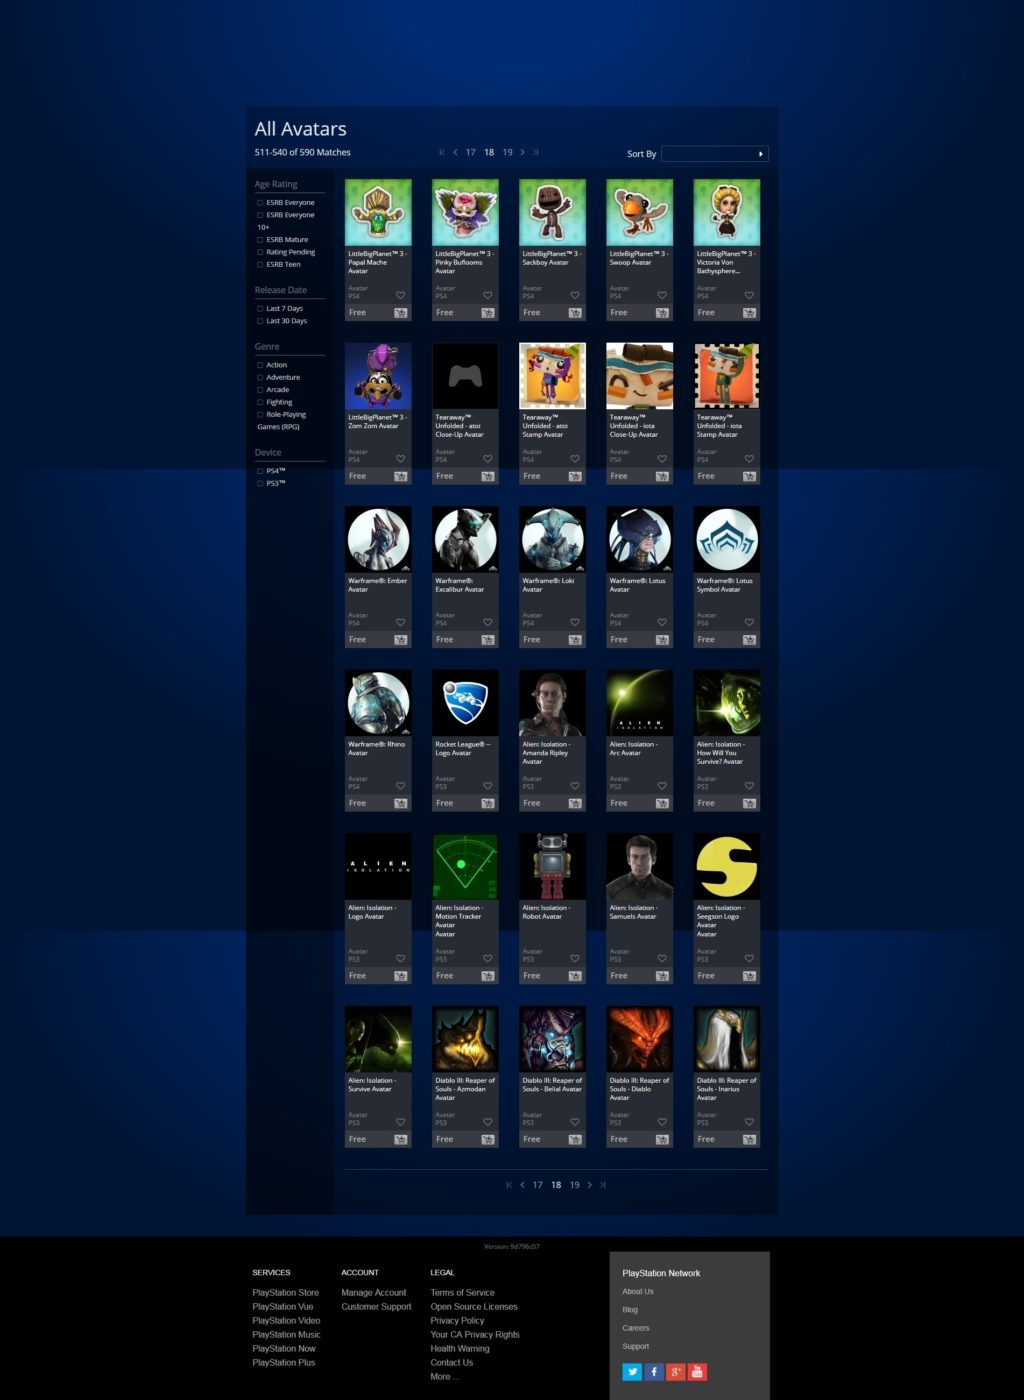 Entretener Óxido perecer Here's the Complete 20-Page List of Free PS4 Avatars and How to Get Them All